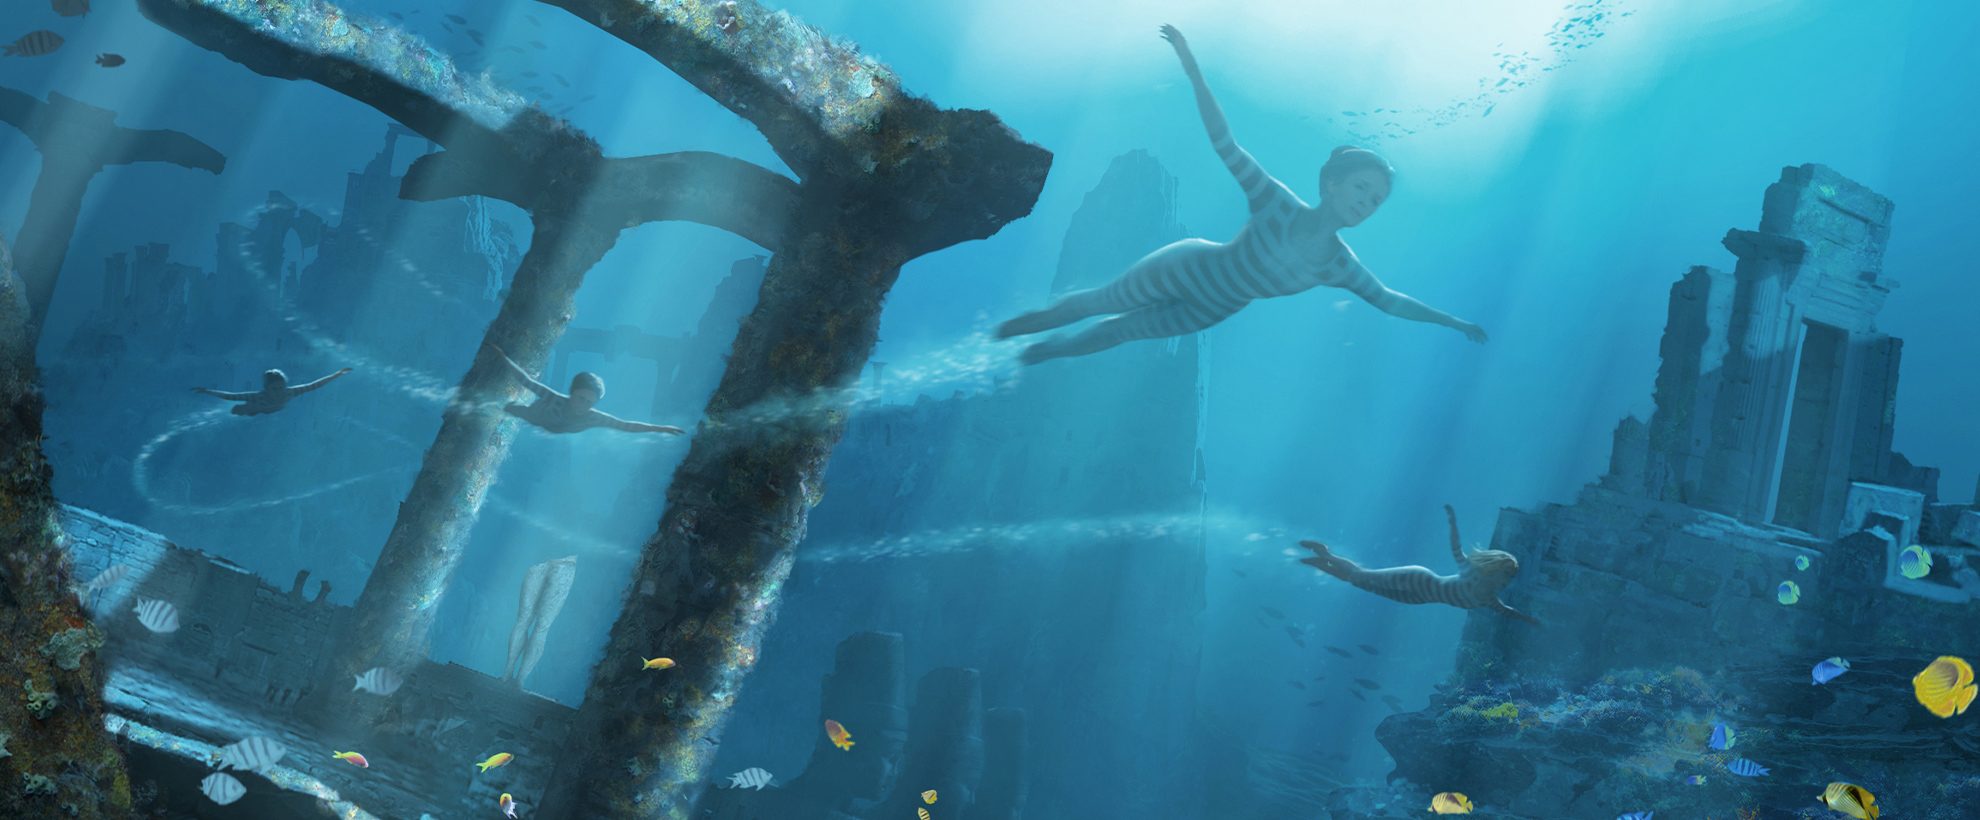 Concept art for Mary Poppins showing the Banks children swimming deep underwater